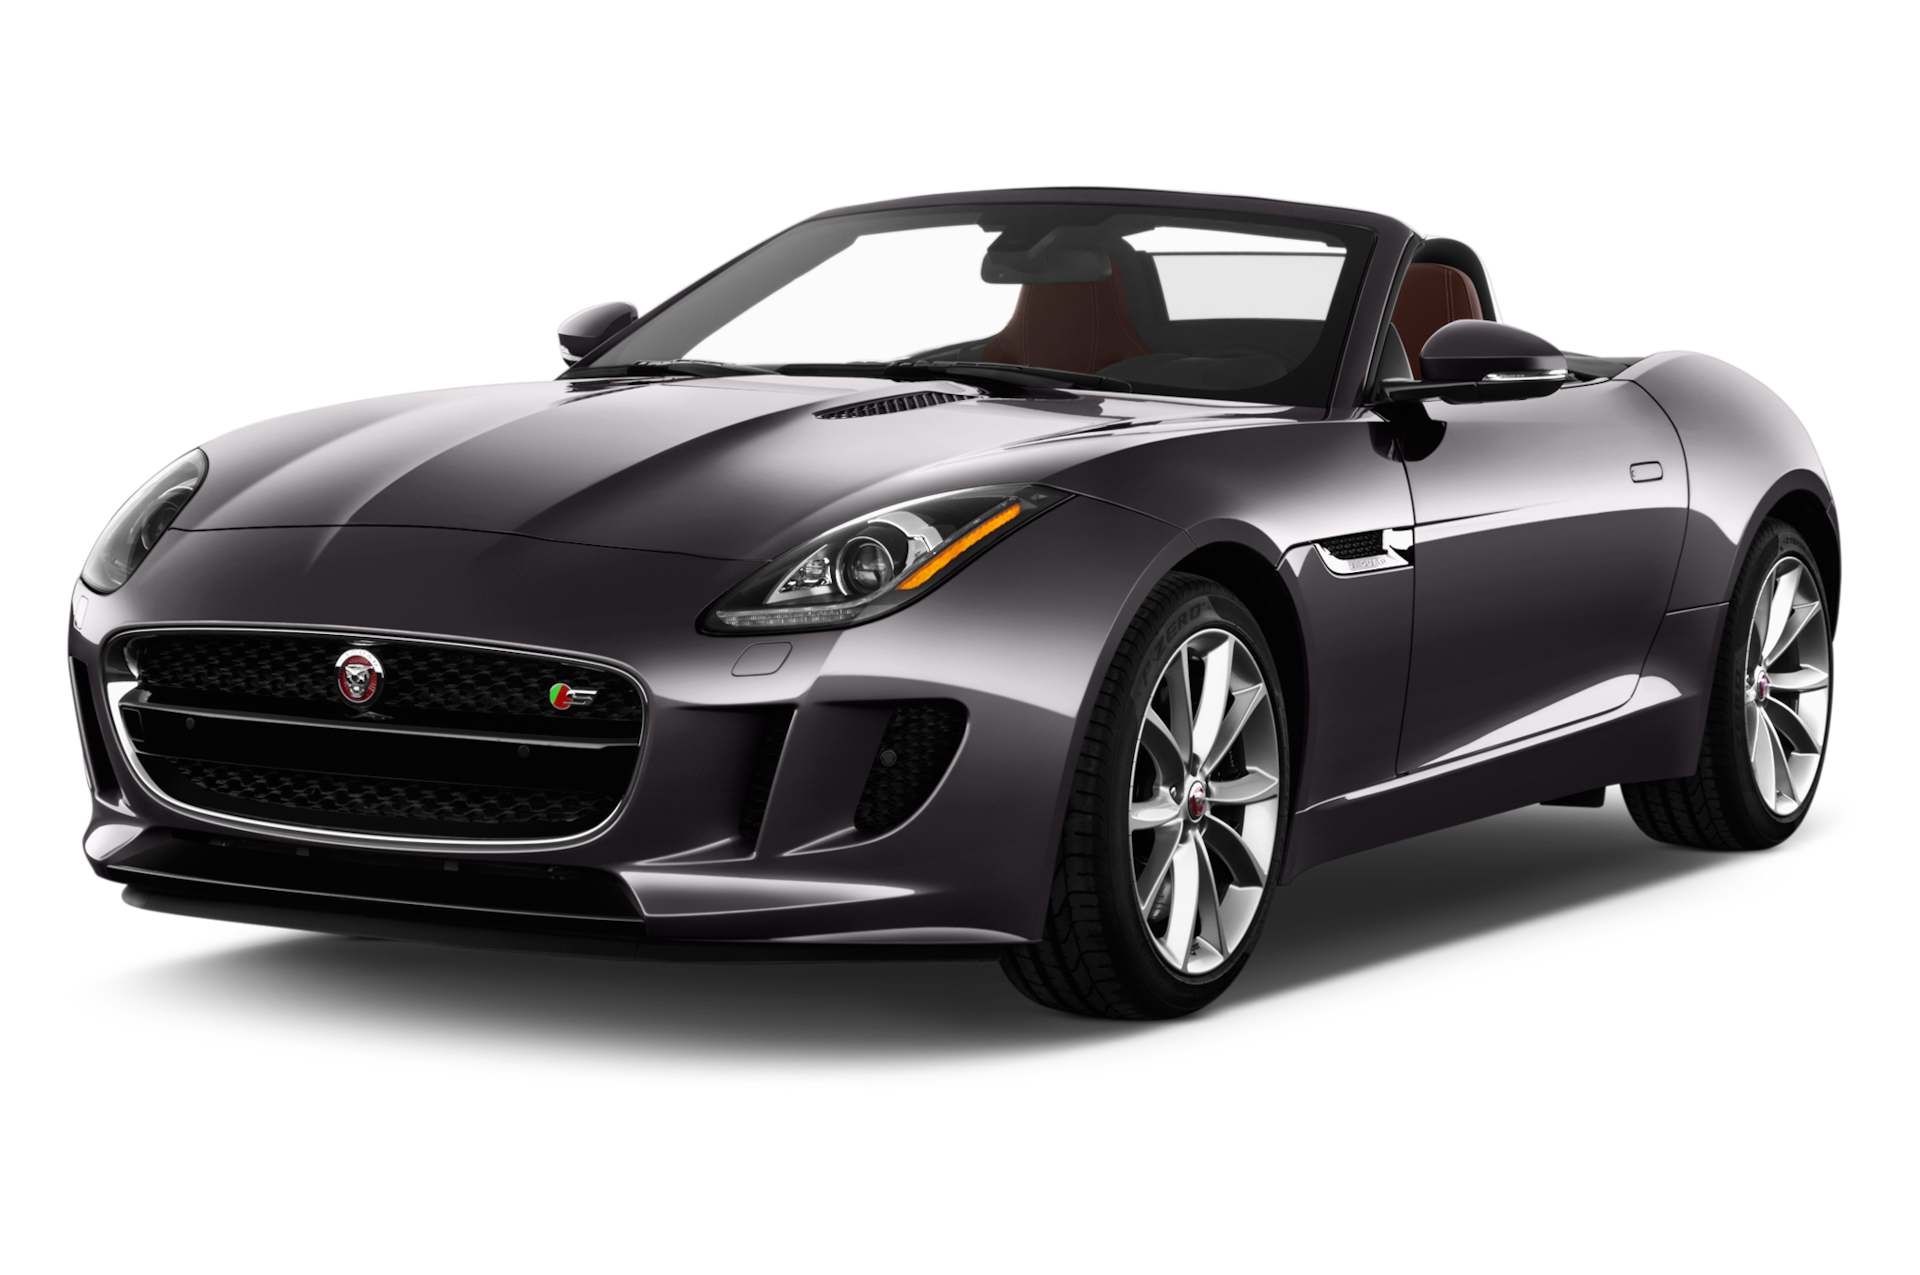 2018 Jaguar F-Type Prices, Reviews, and Photos - MotorTrend